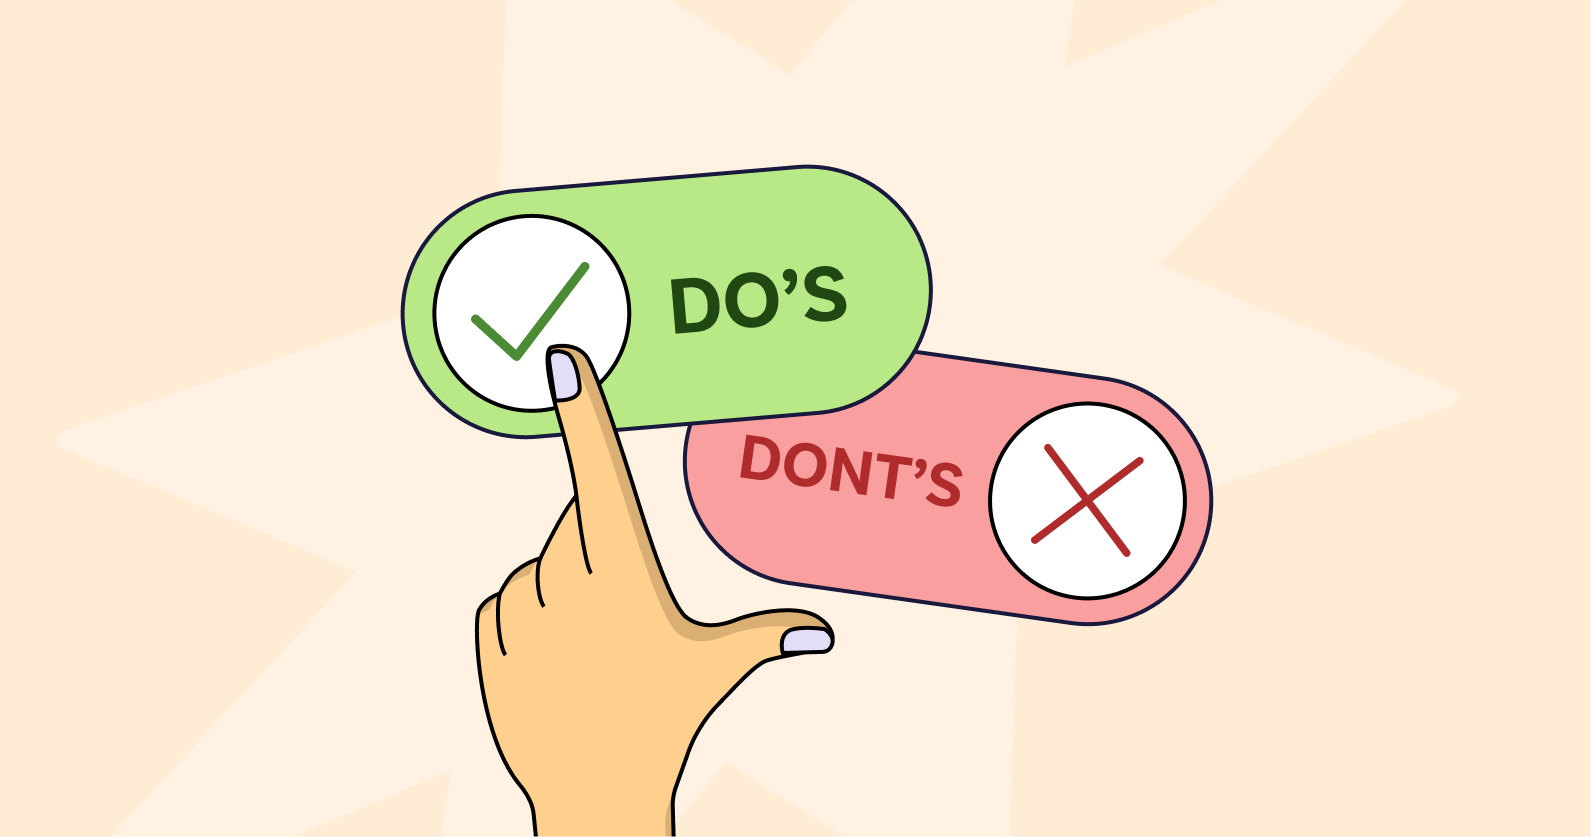 Illustration of a persons hand sliding between a do and don't button.